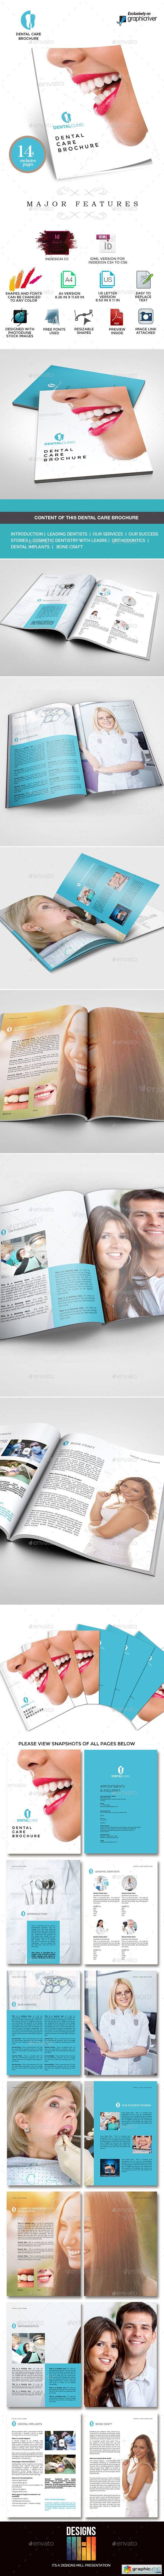 Dental Clinic Services or Care Brochure